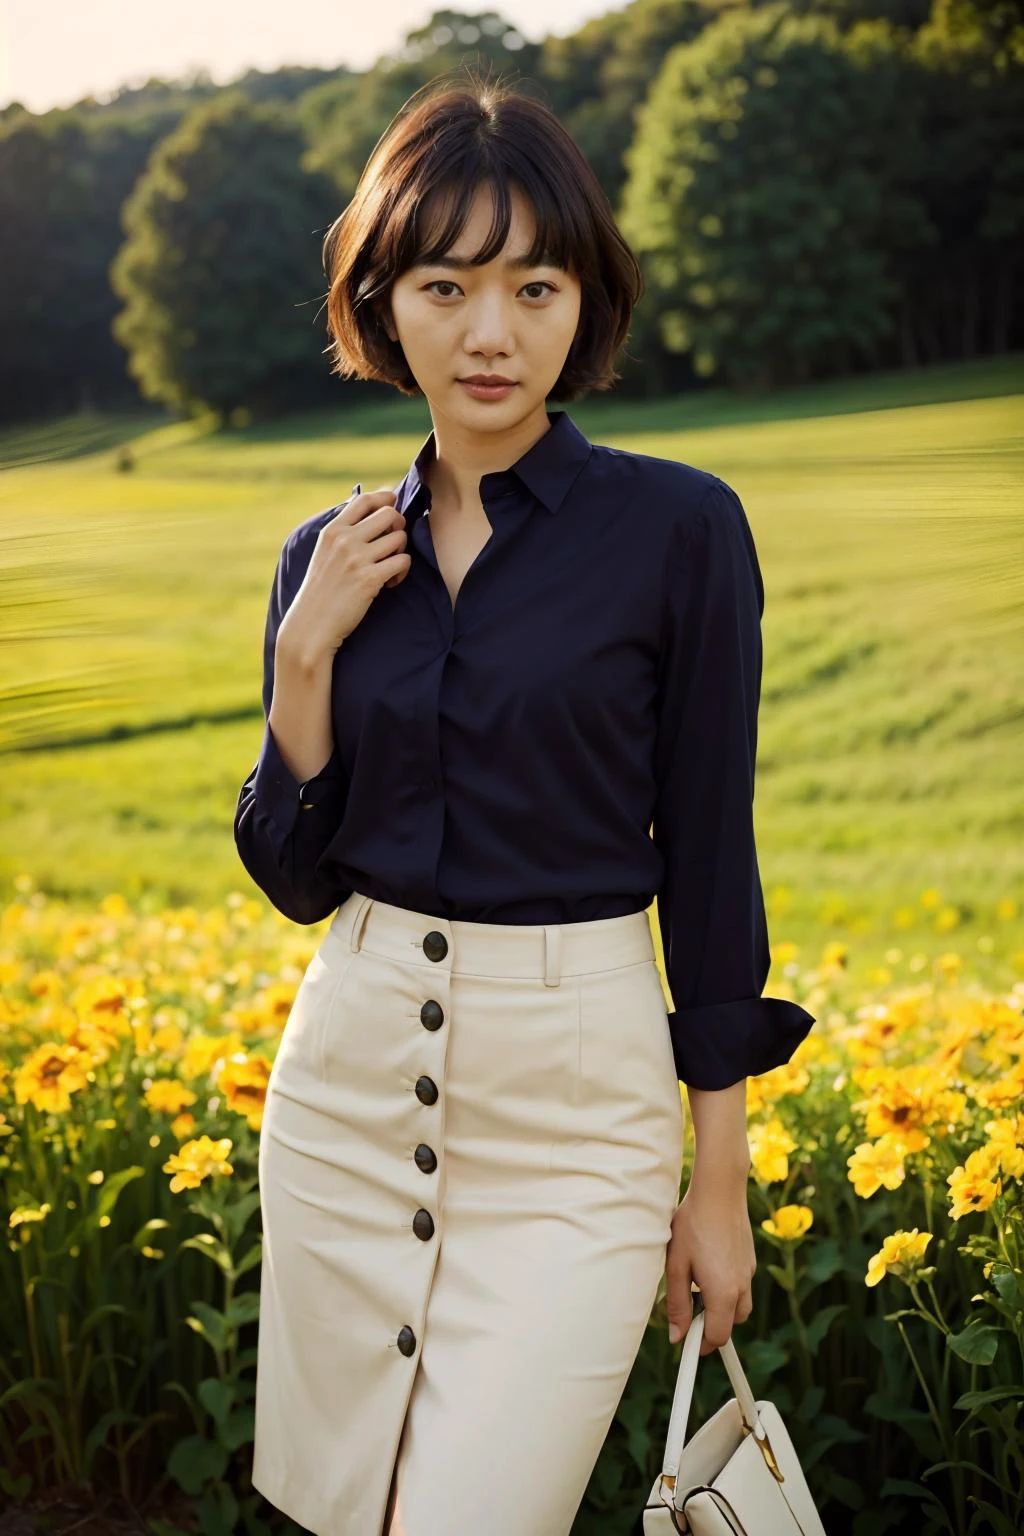 ((seductive pose)), (dynamic angle), (outdoors, in a field of flowers)
A photograph of (1girl, 35 years old, seductive smile), zh_baedoona, solo, realistic, black eyes, black hair, looking at viewer, wearing (wearing button shirt, and pencil skirt)